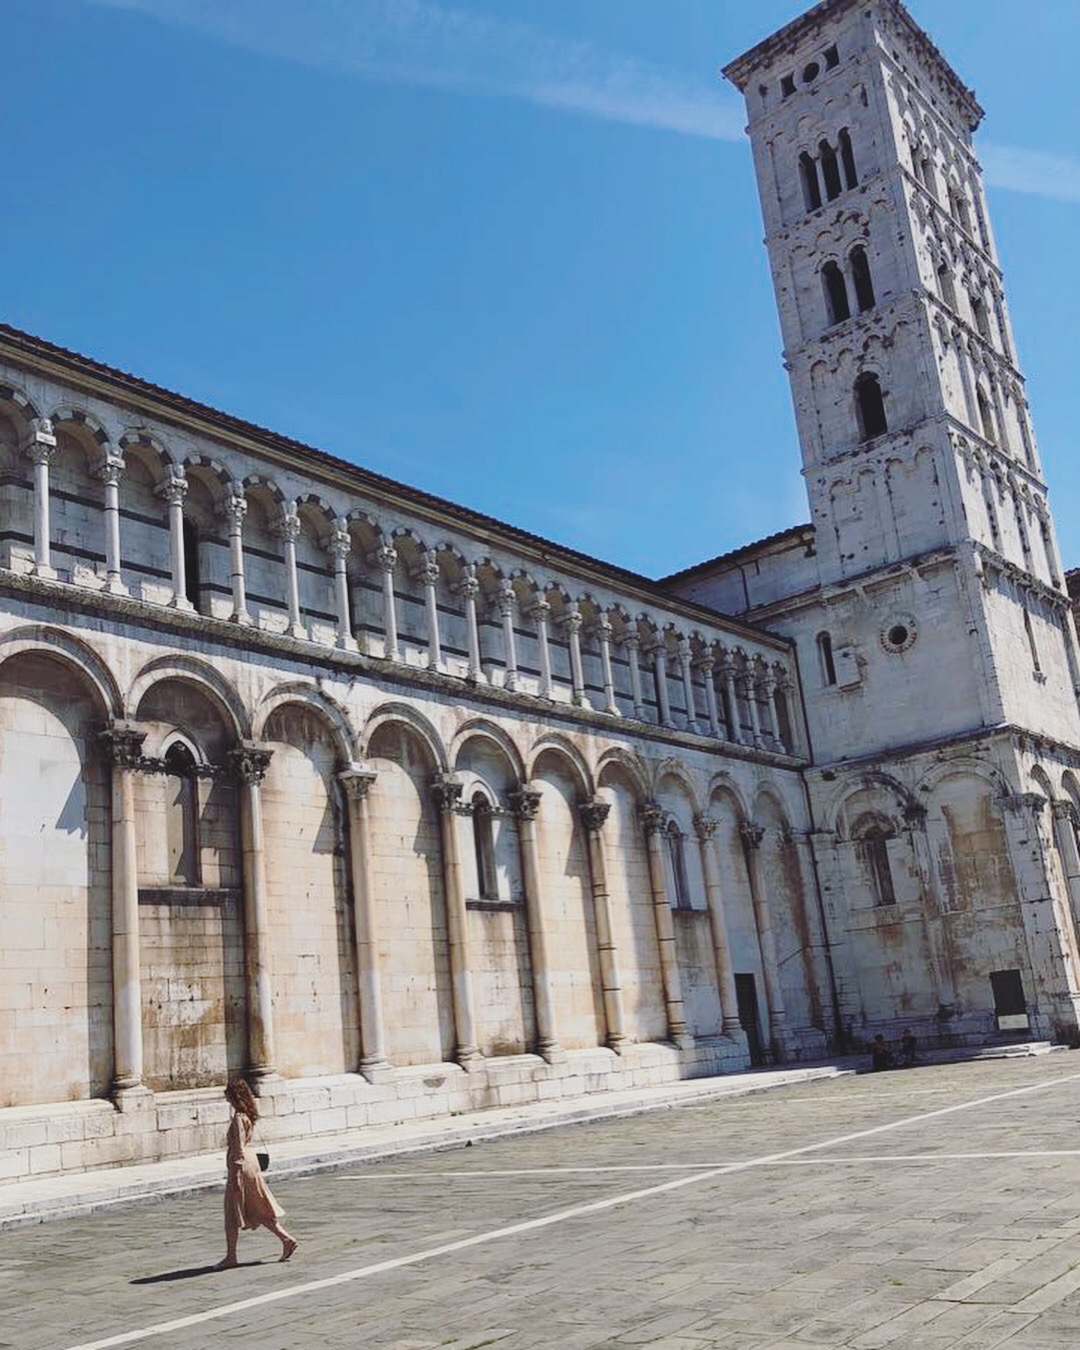 San Michele in Foro church, Lucca Italy